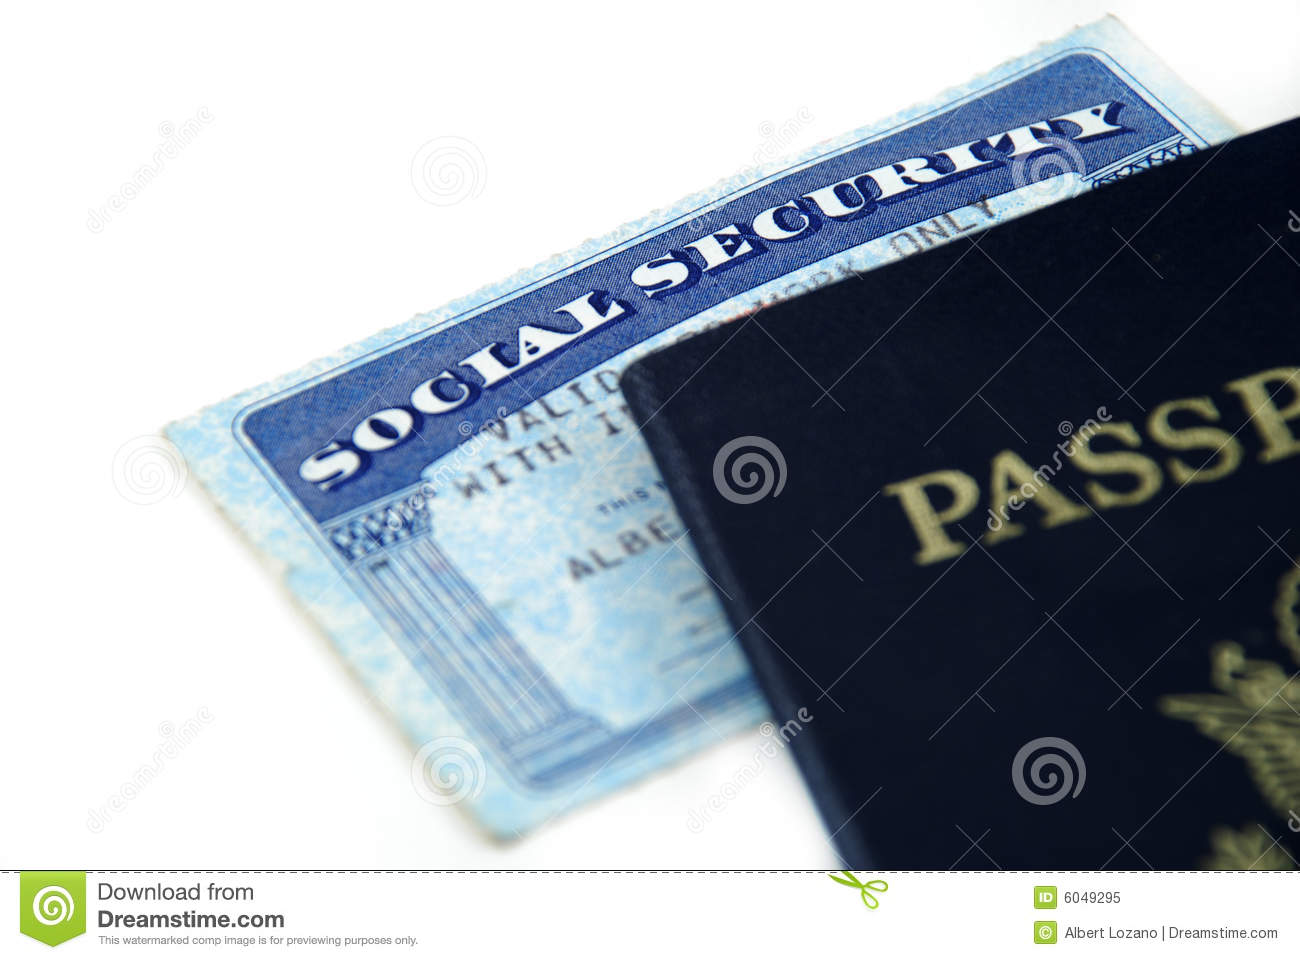 Social Security Card Royalty Free Stock Photo   Image  6049295